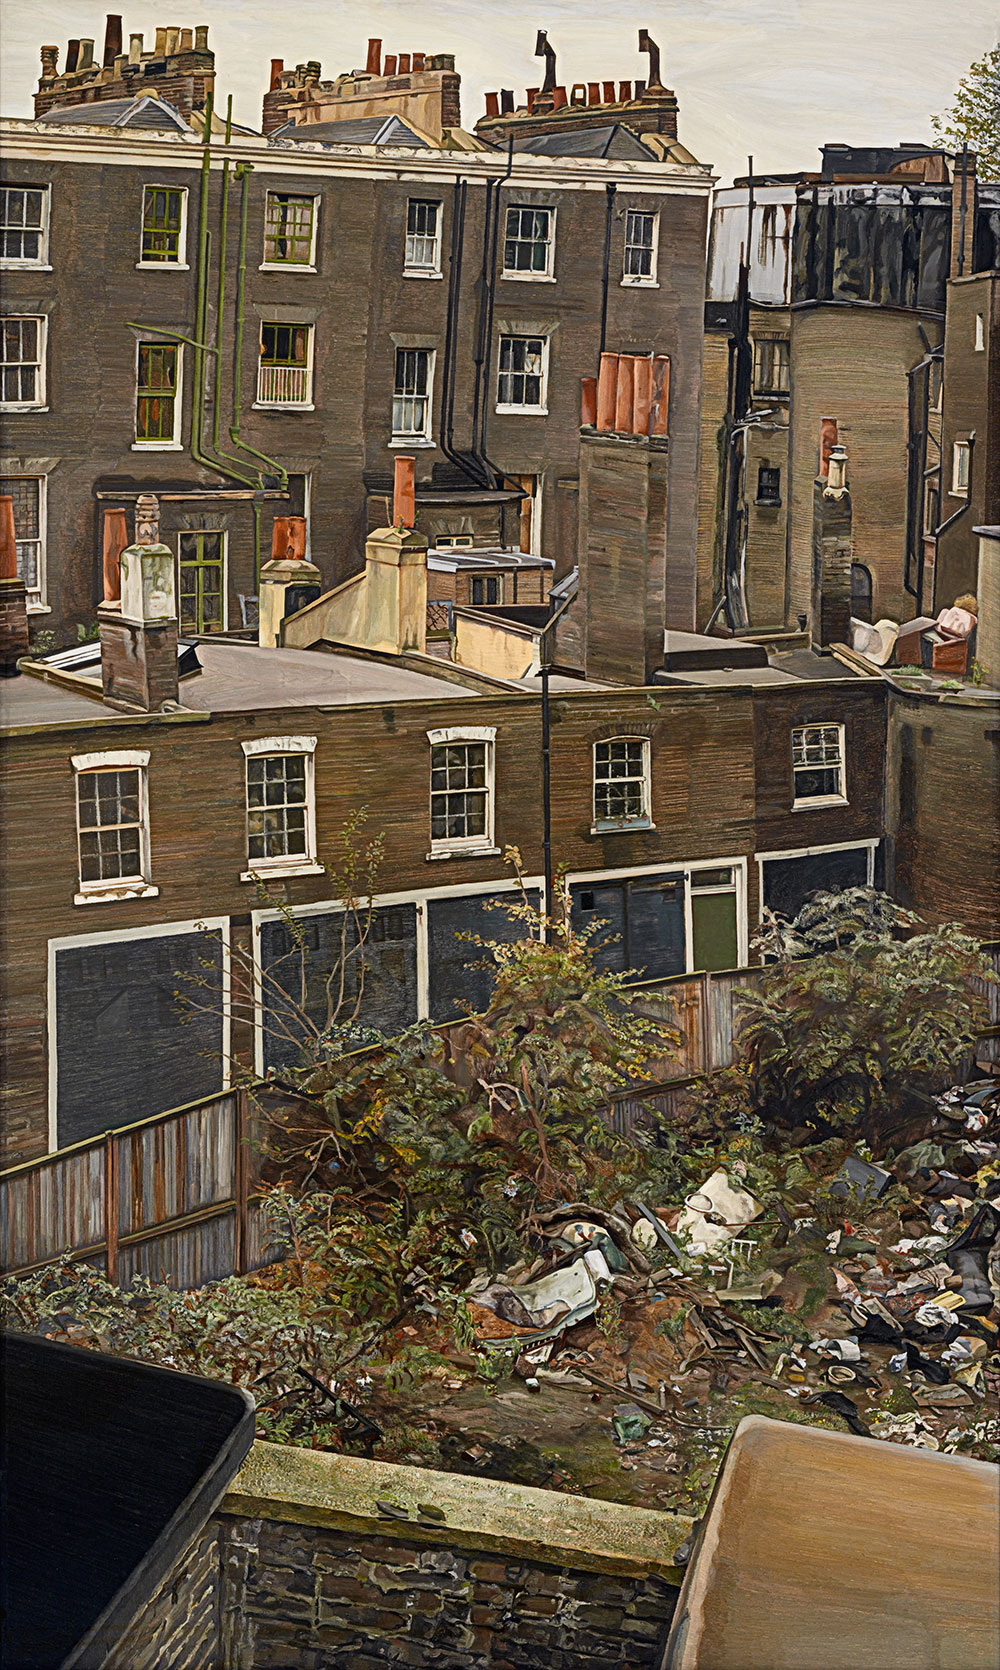 Lucian Freud, Wasteground with Houses, Paddington, 1970–2, oil on canvas, 167 × 101 cm, 65¾ × 39¾ in. © The Lucian Freud Archive / Bridgeman Images; photography by John Riddy (volume 1, page 285)